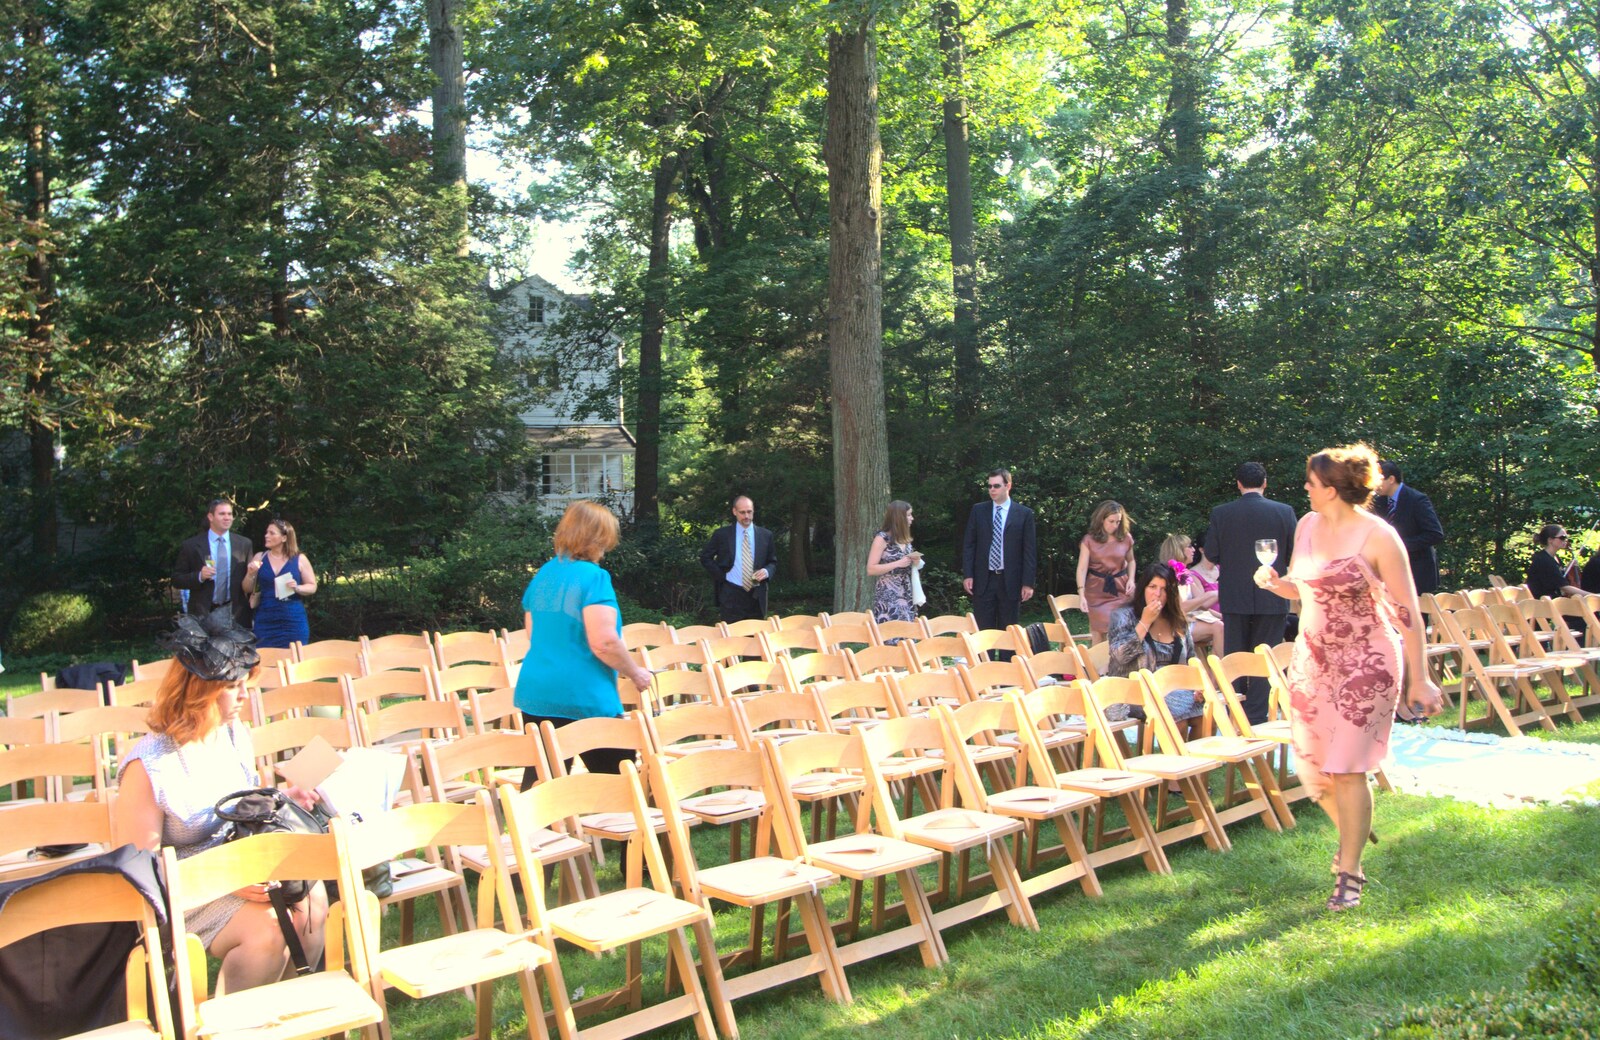 Chairs in the garden from Phil and Tania's Wedding, Short Hills, New Jersey, USA - 20th August 2011